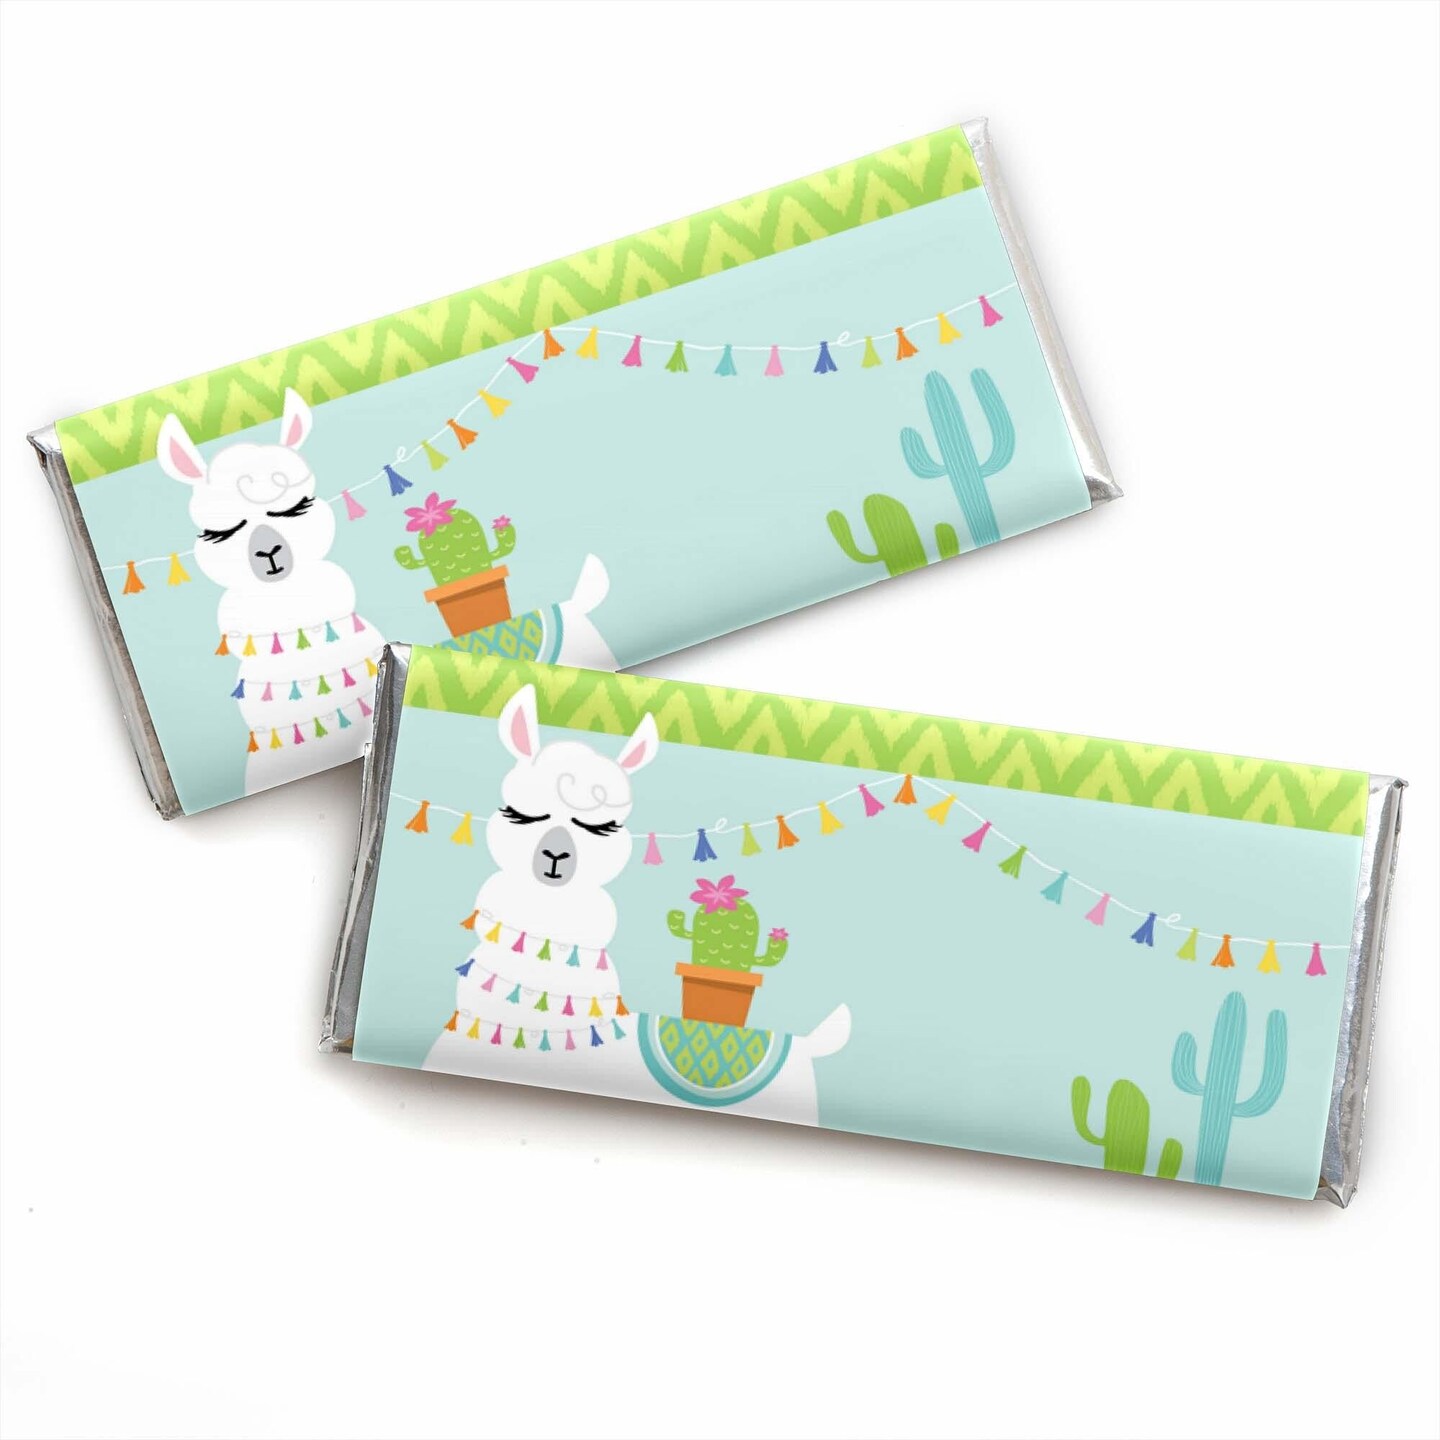 Big Dot of Happiness Cow Print - Mini Candy Bar Wrapper Stickers